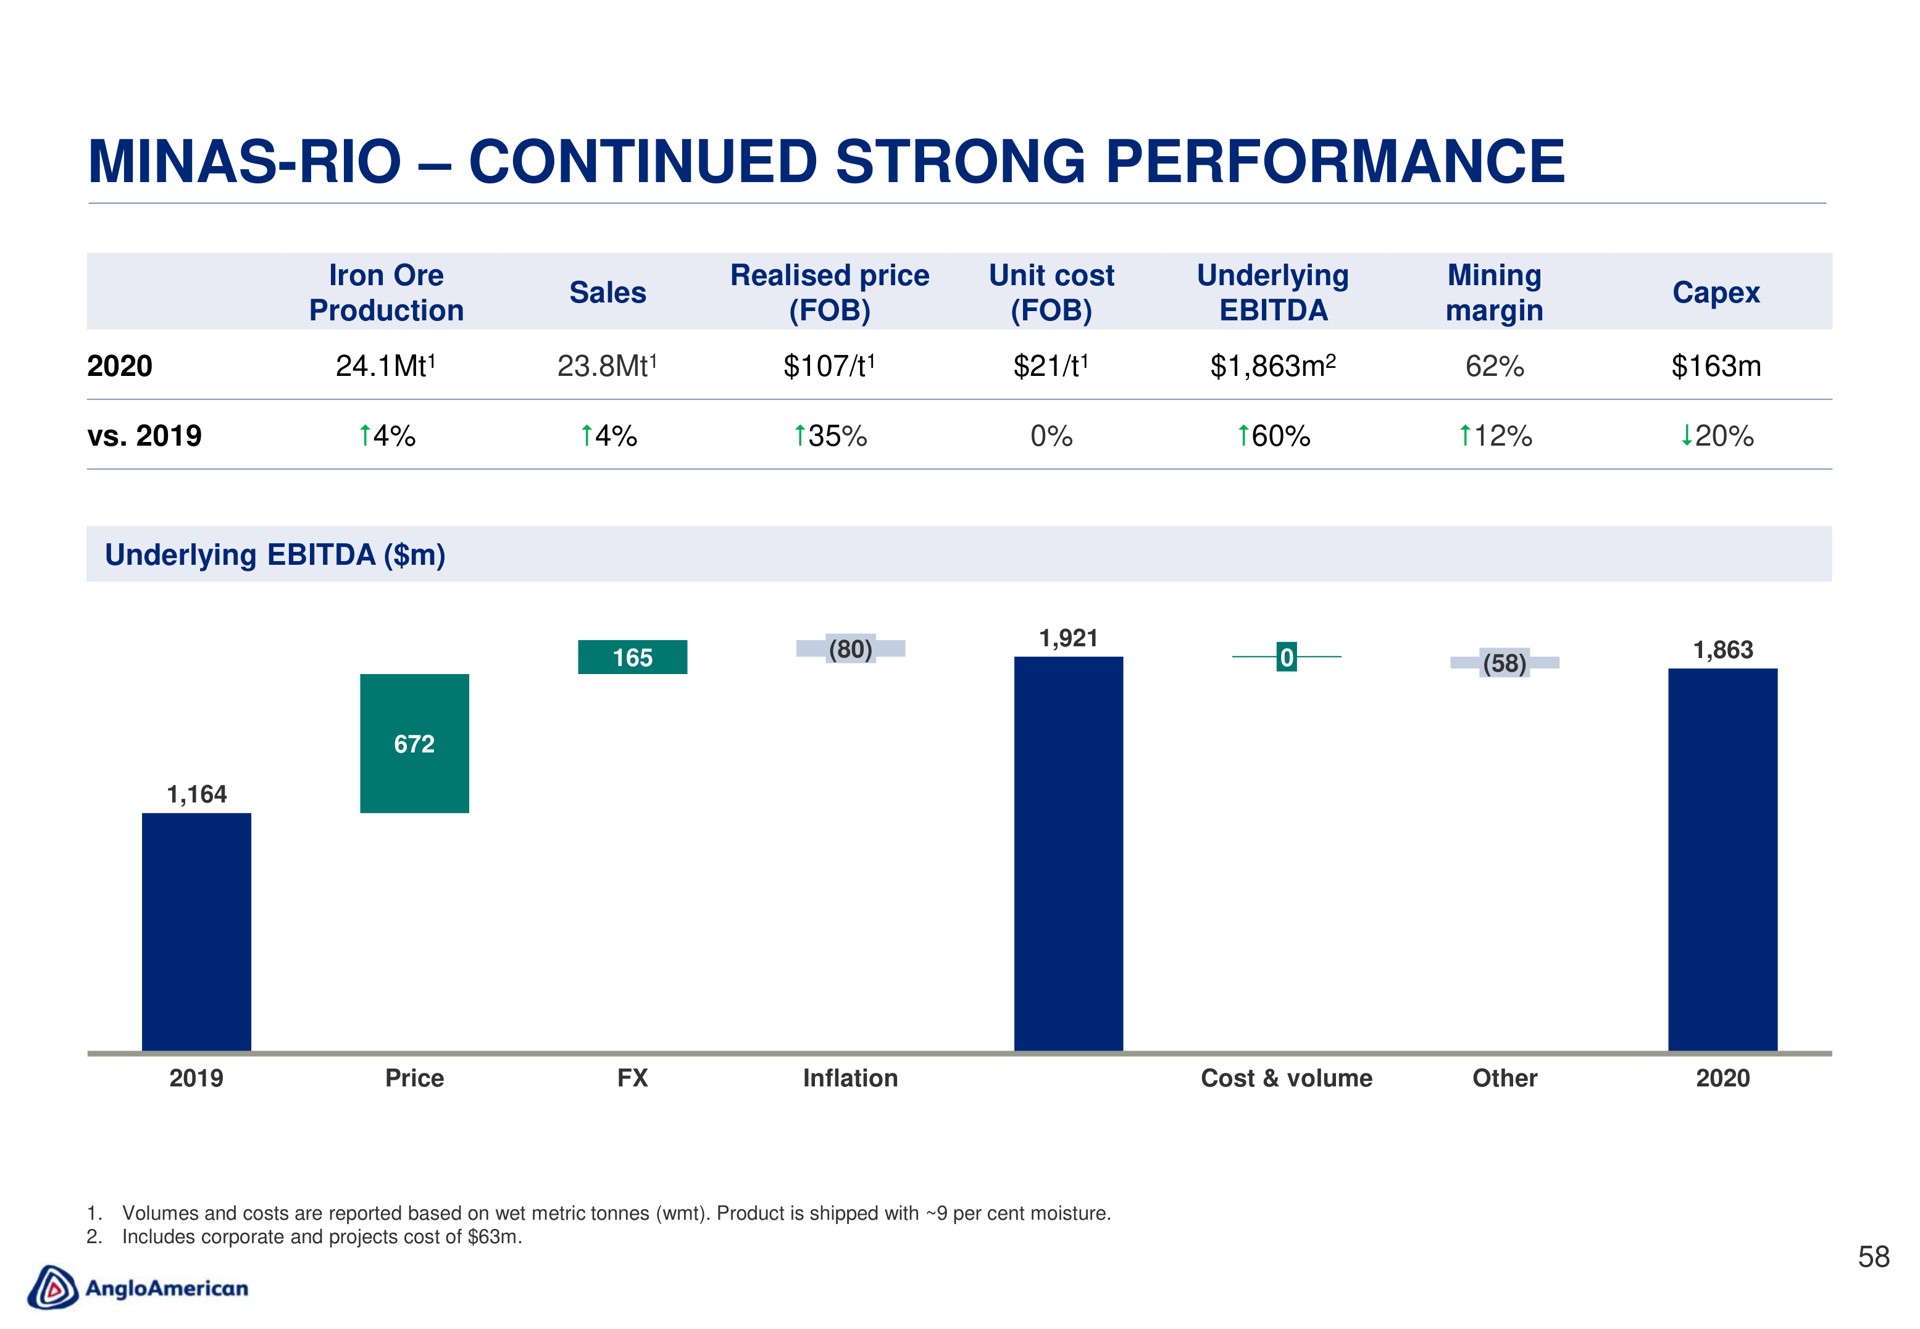 minas rio continued strong performance | AngloAmerican